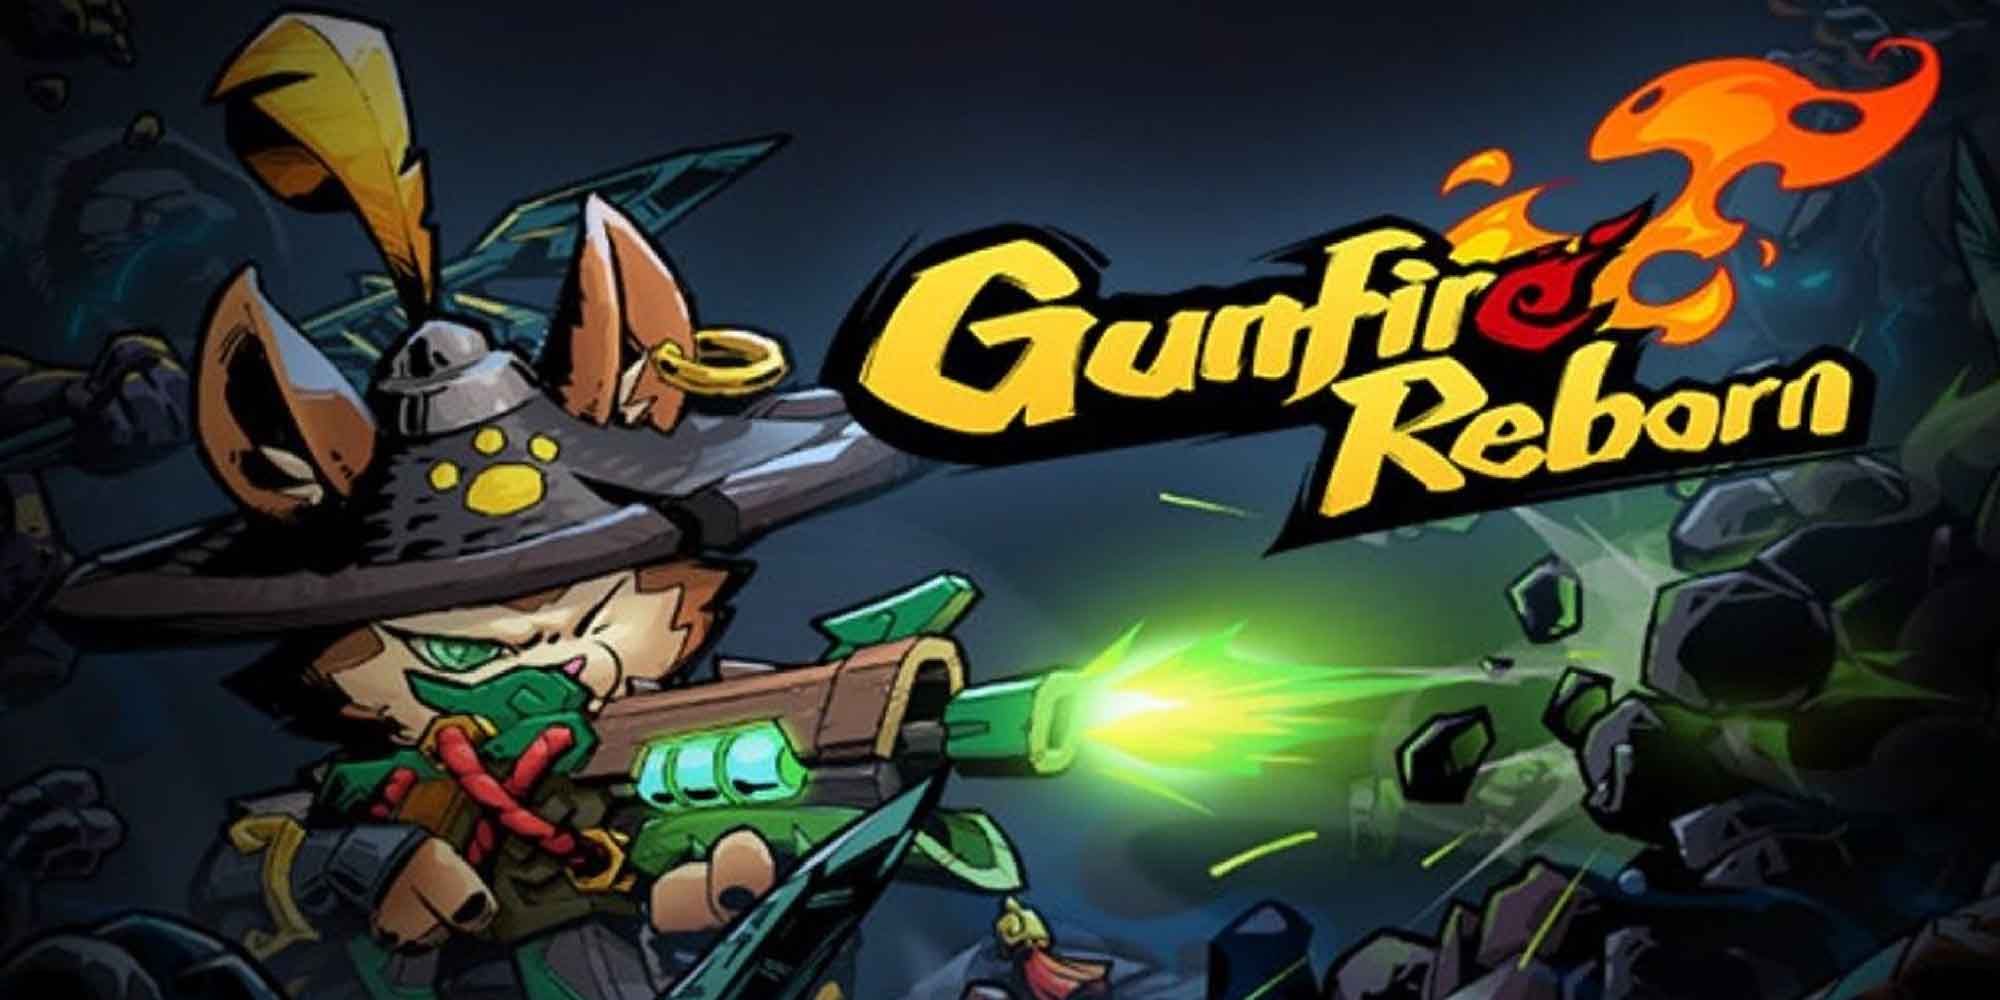 Promotional Image of Gunfire Reborn featuring the Crown Prince character using the Dragonchaser weapon